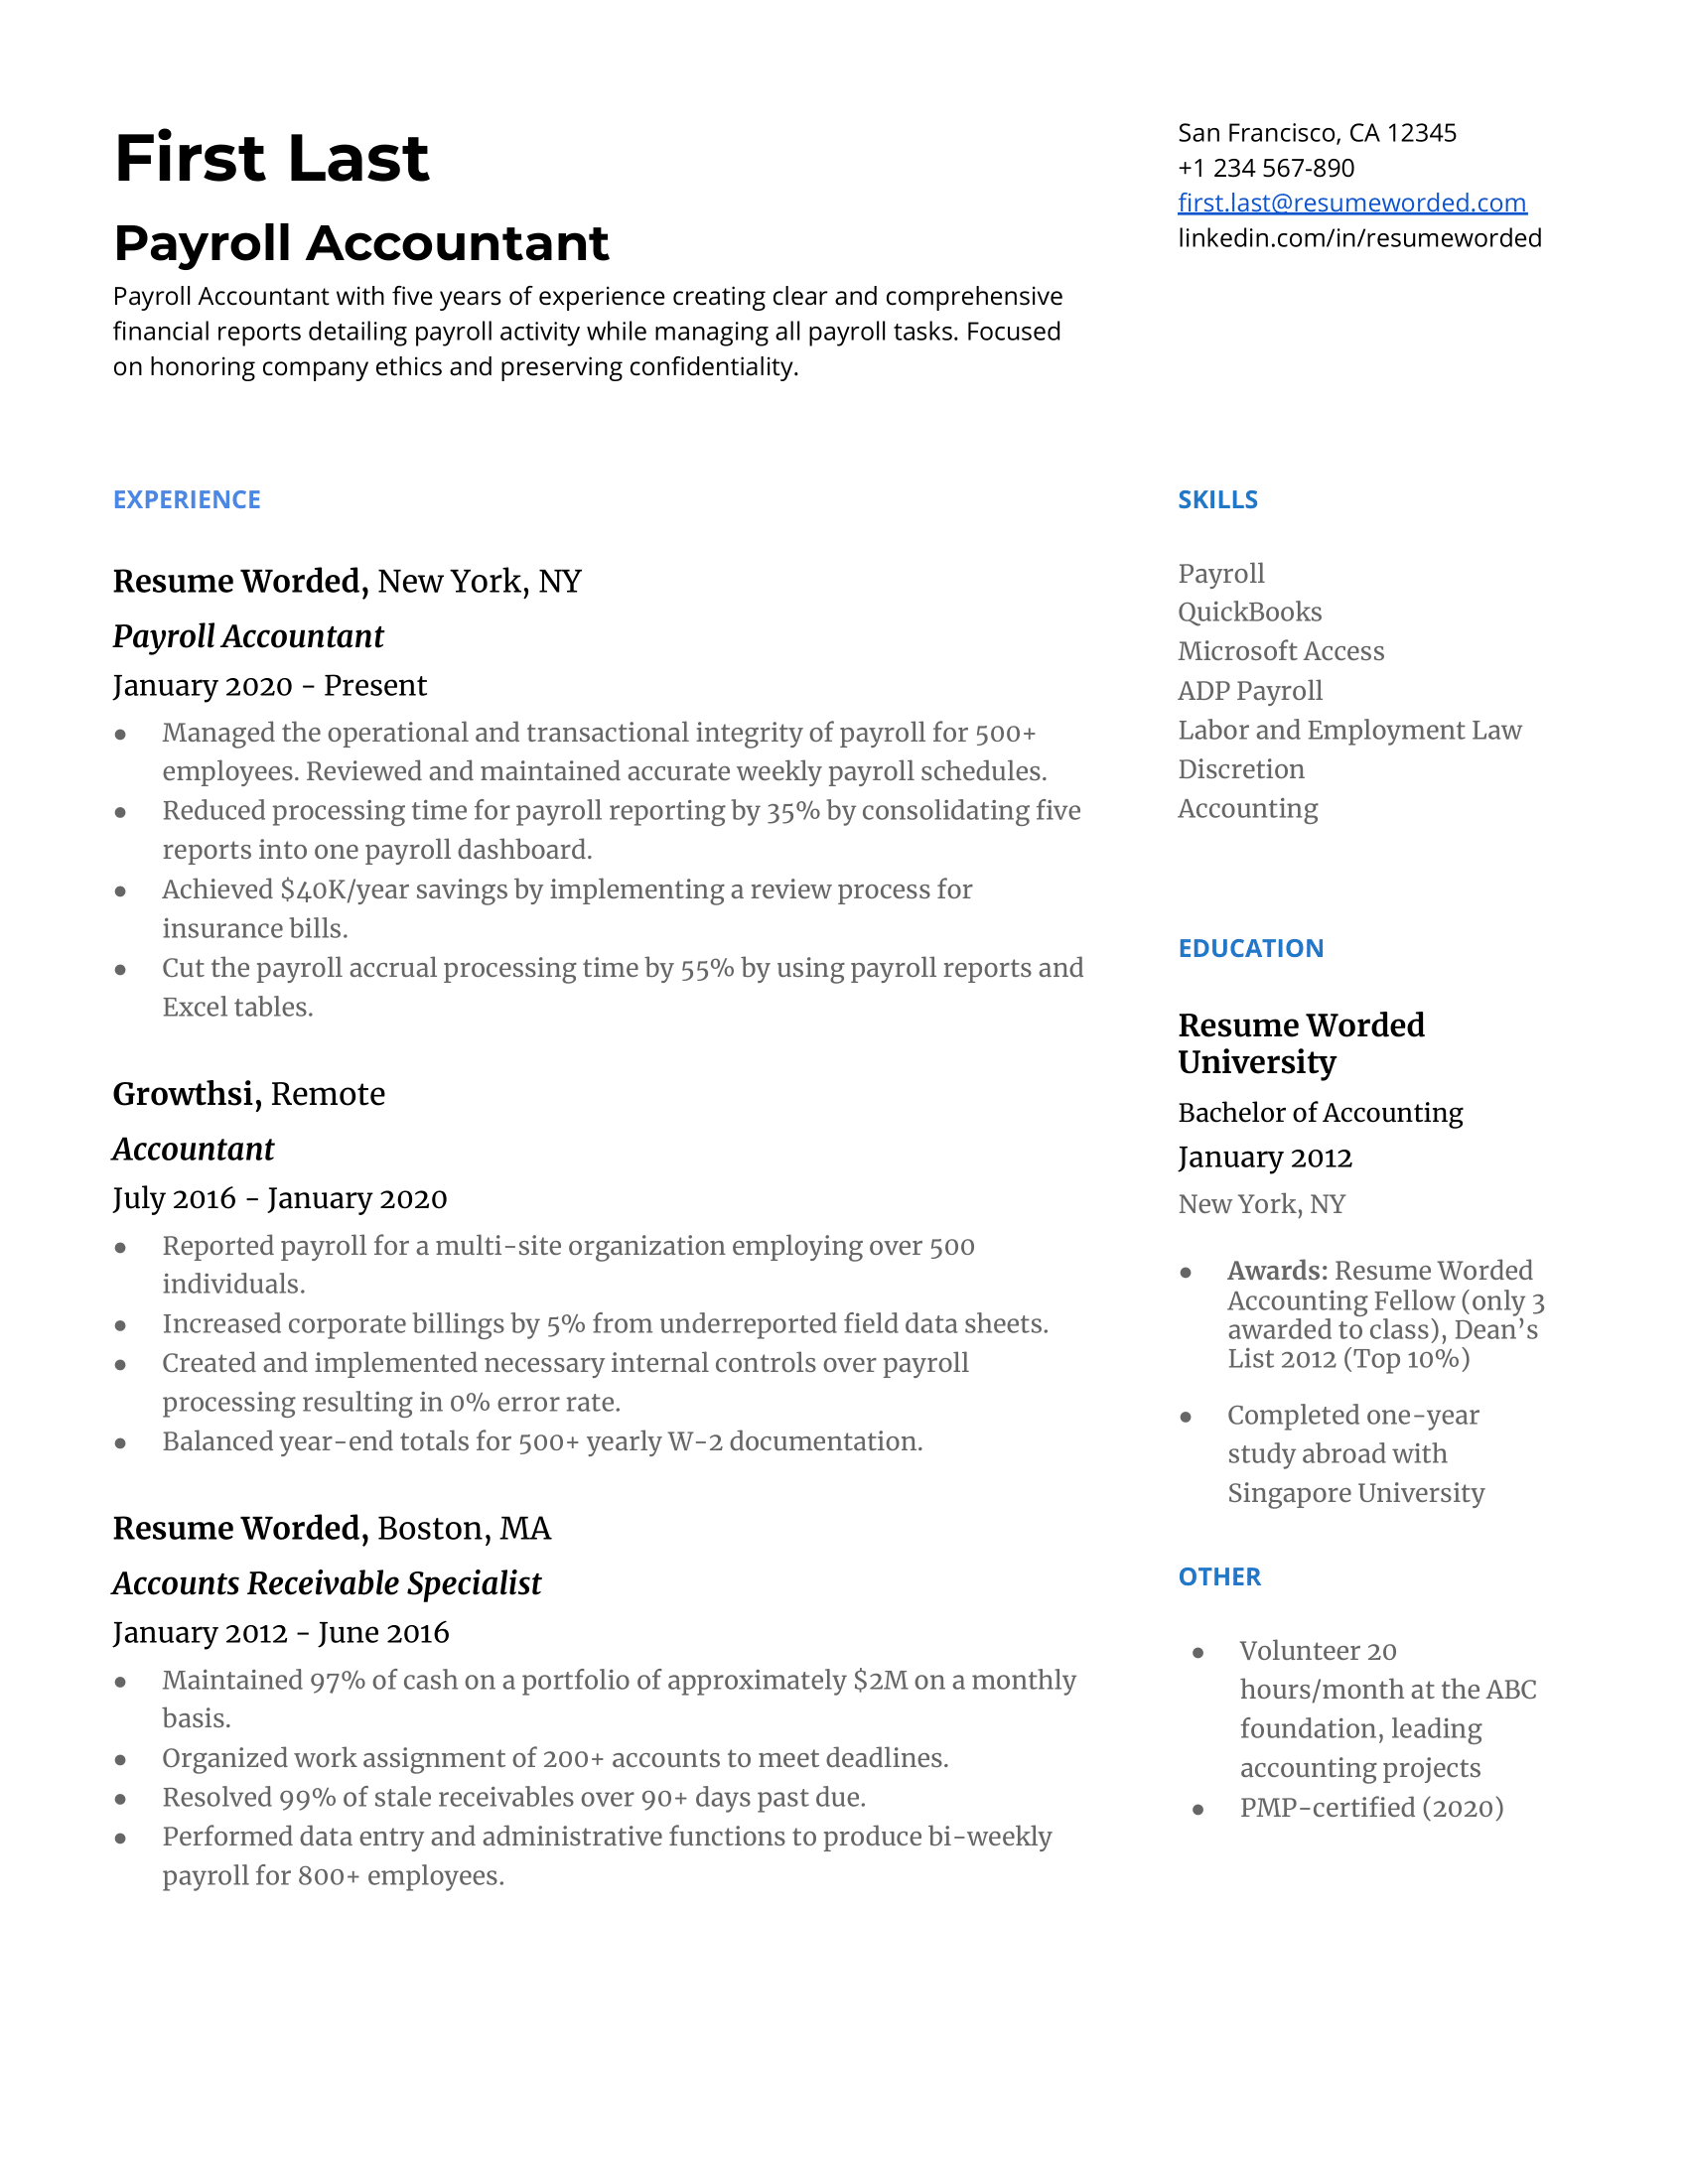 A payroll accountant resume template demonstrating their value in the industry.